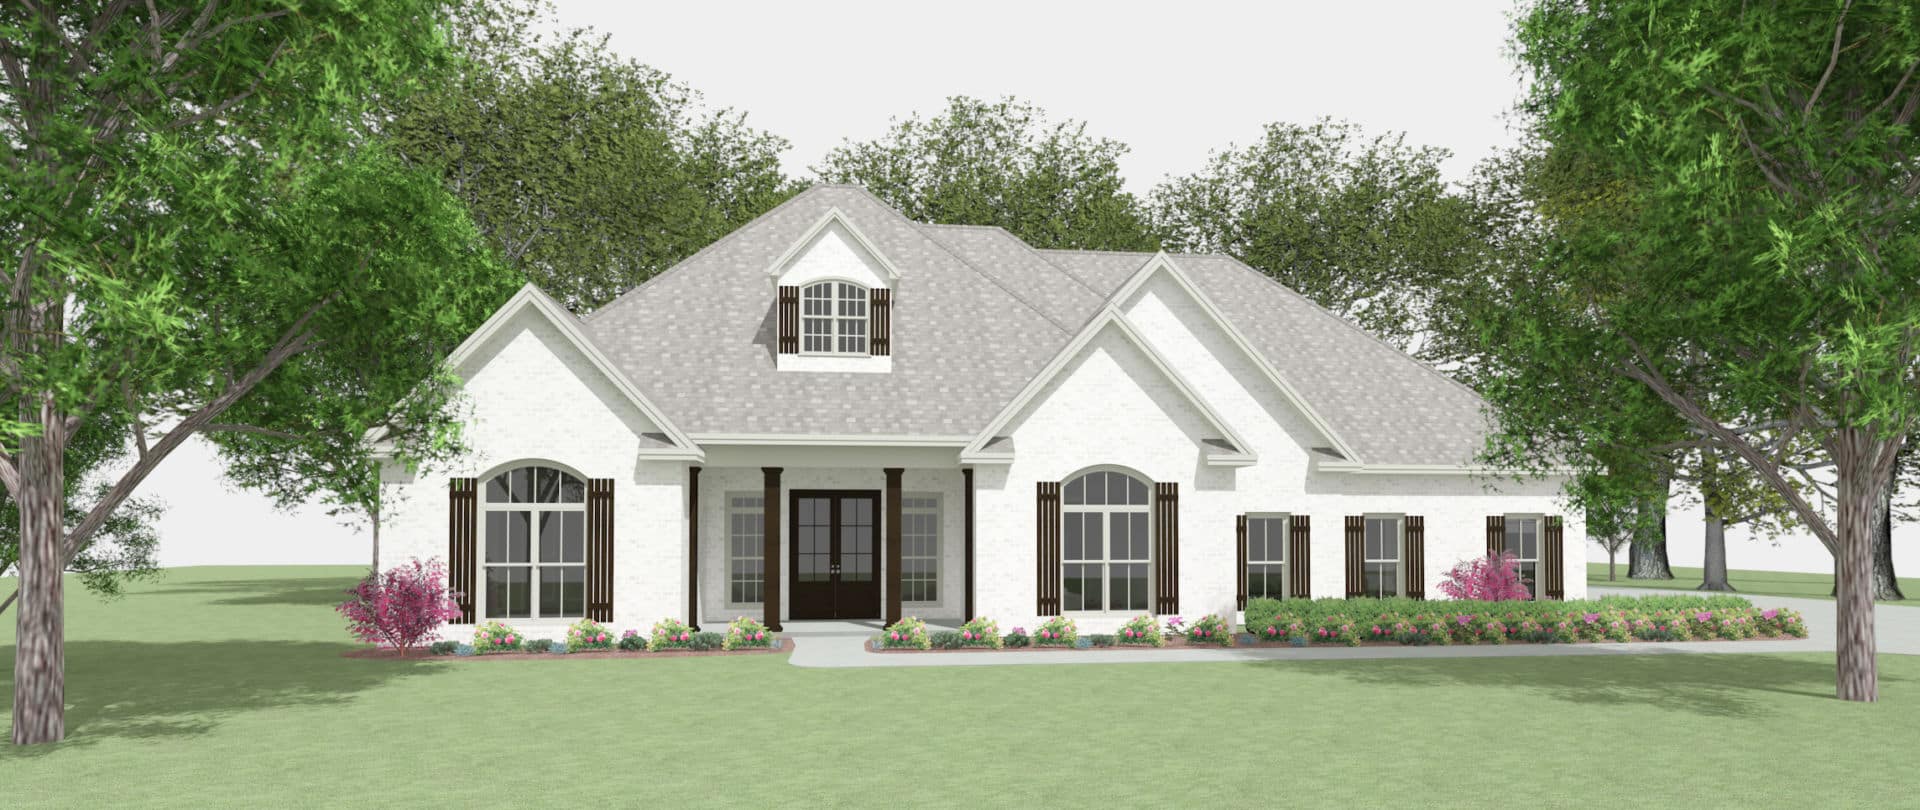 2020 Middle St. Jude Dream Home Giveaway MidSouth Community